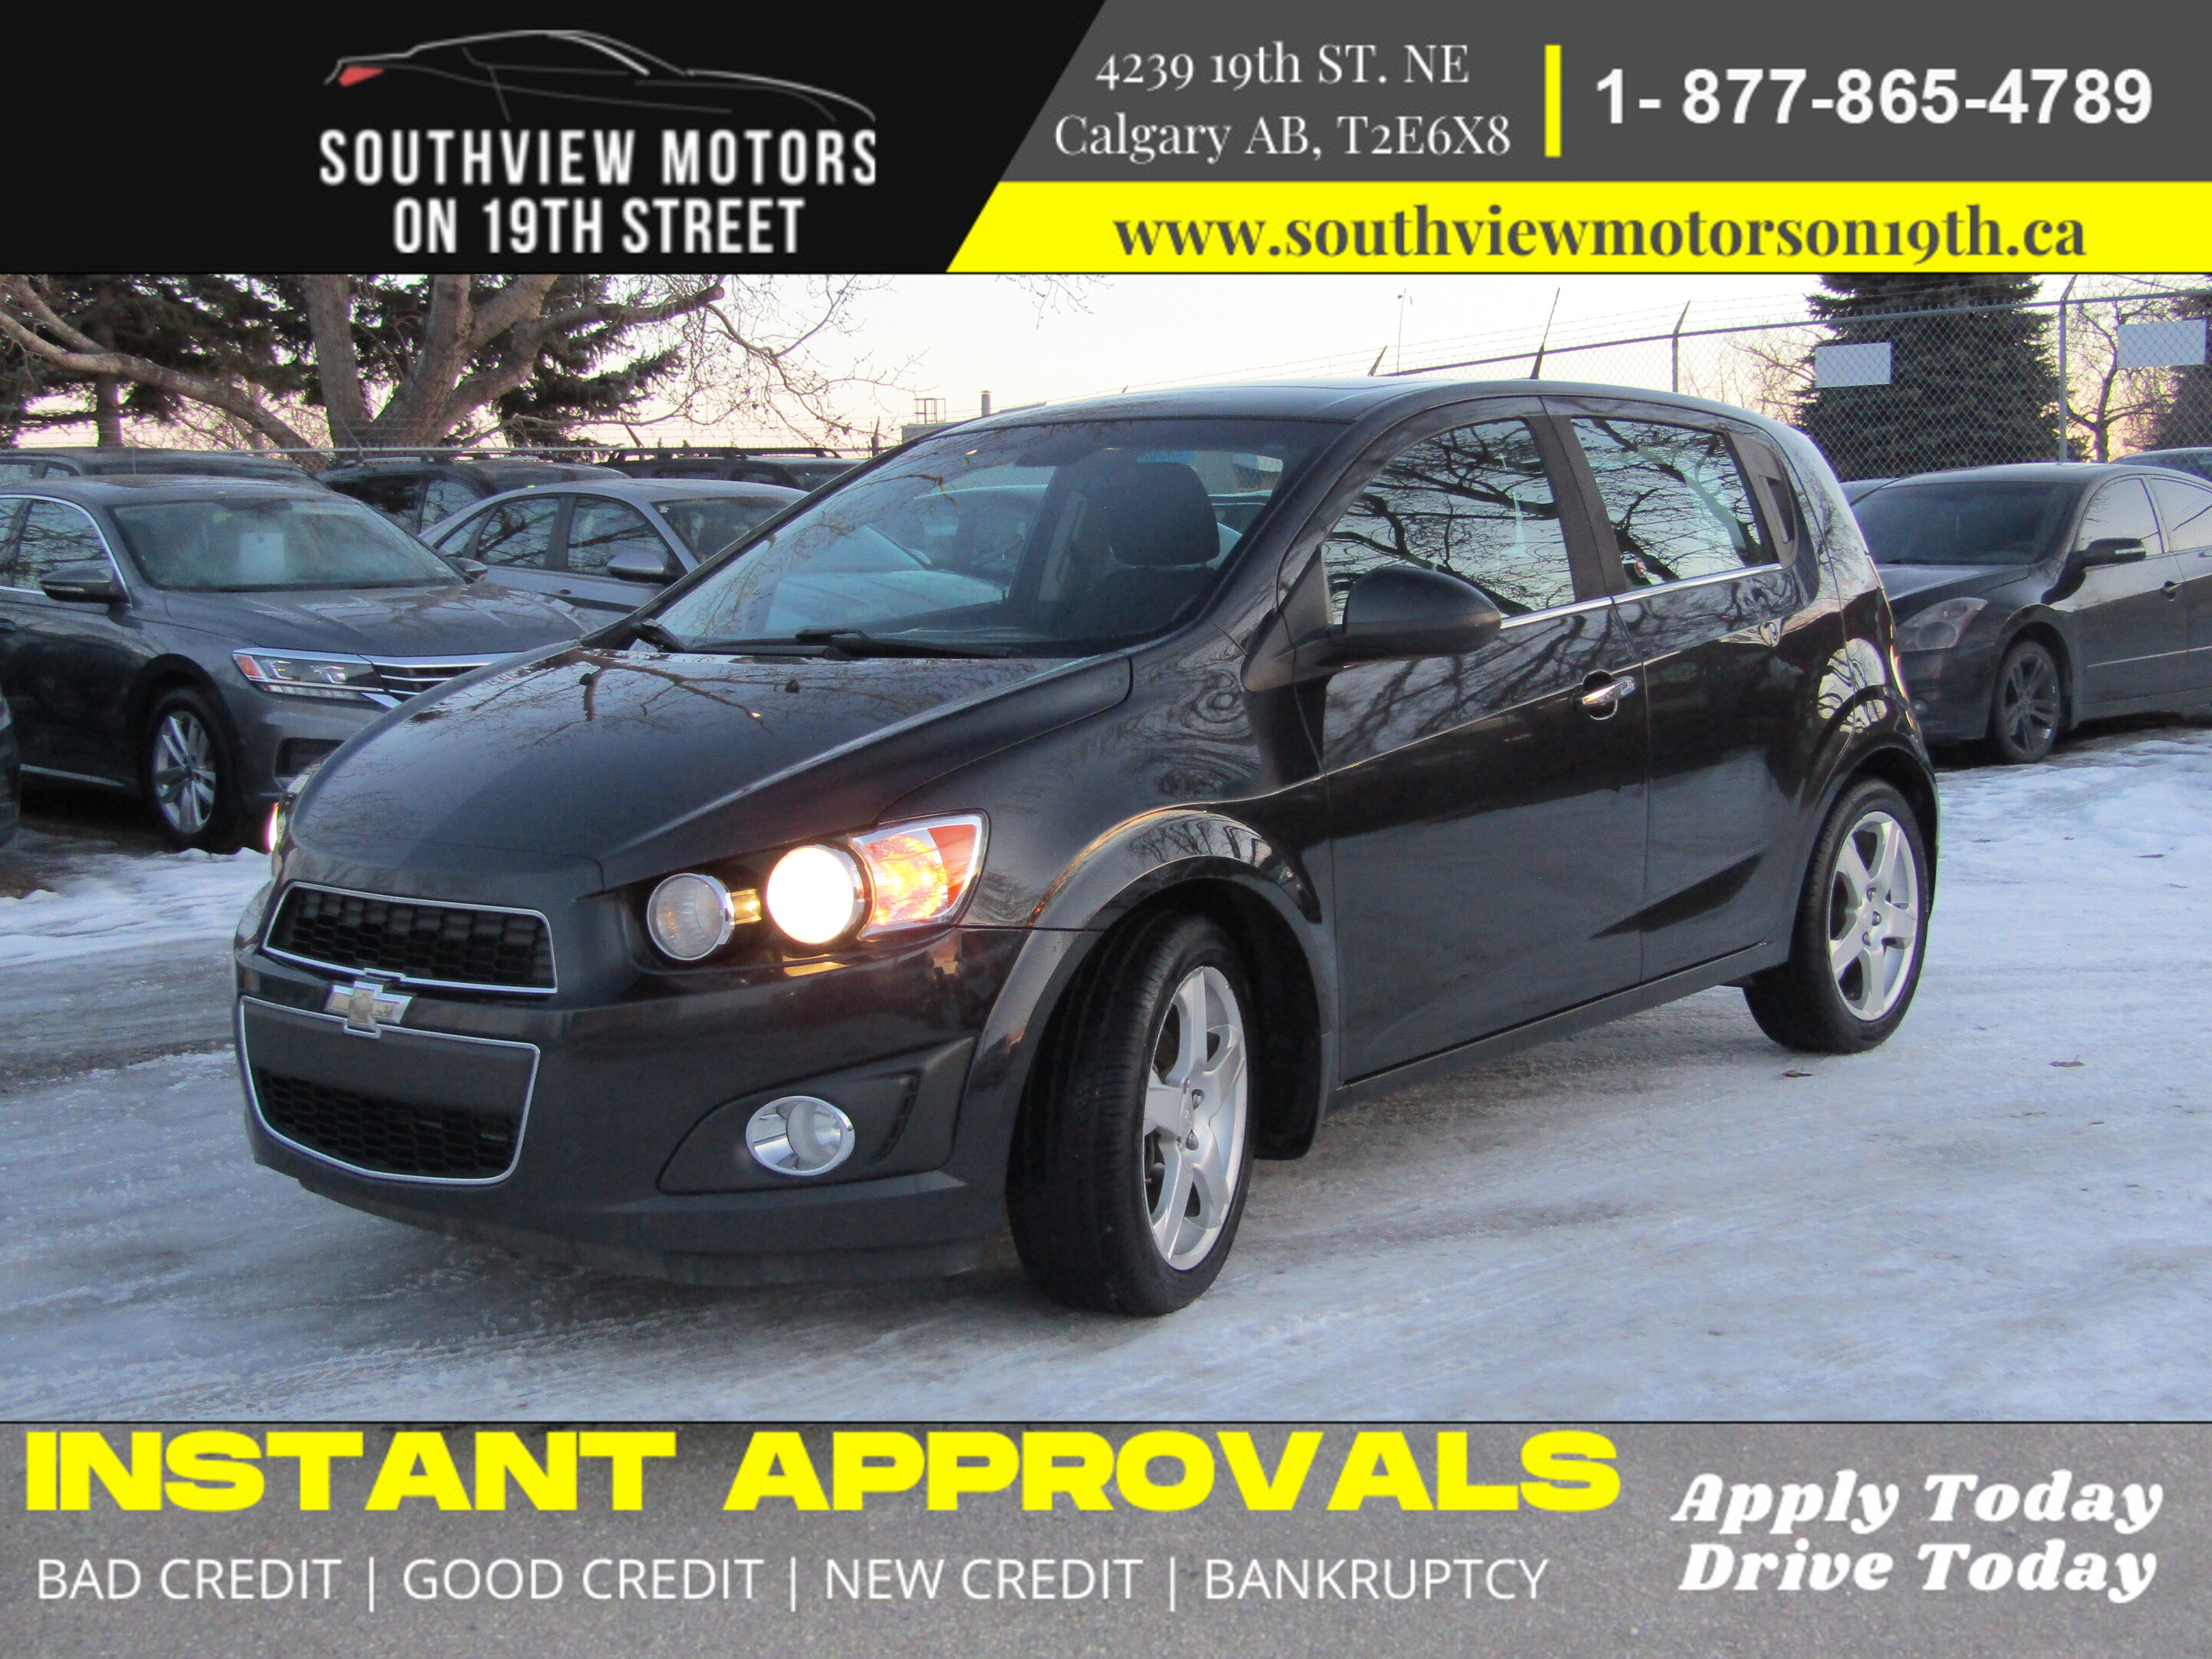 2014 Chevrolet Sonic LT-SUNROOF-HEATED SEATS-FINANCING AVAILABLE